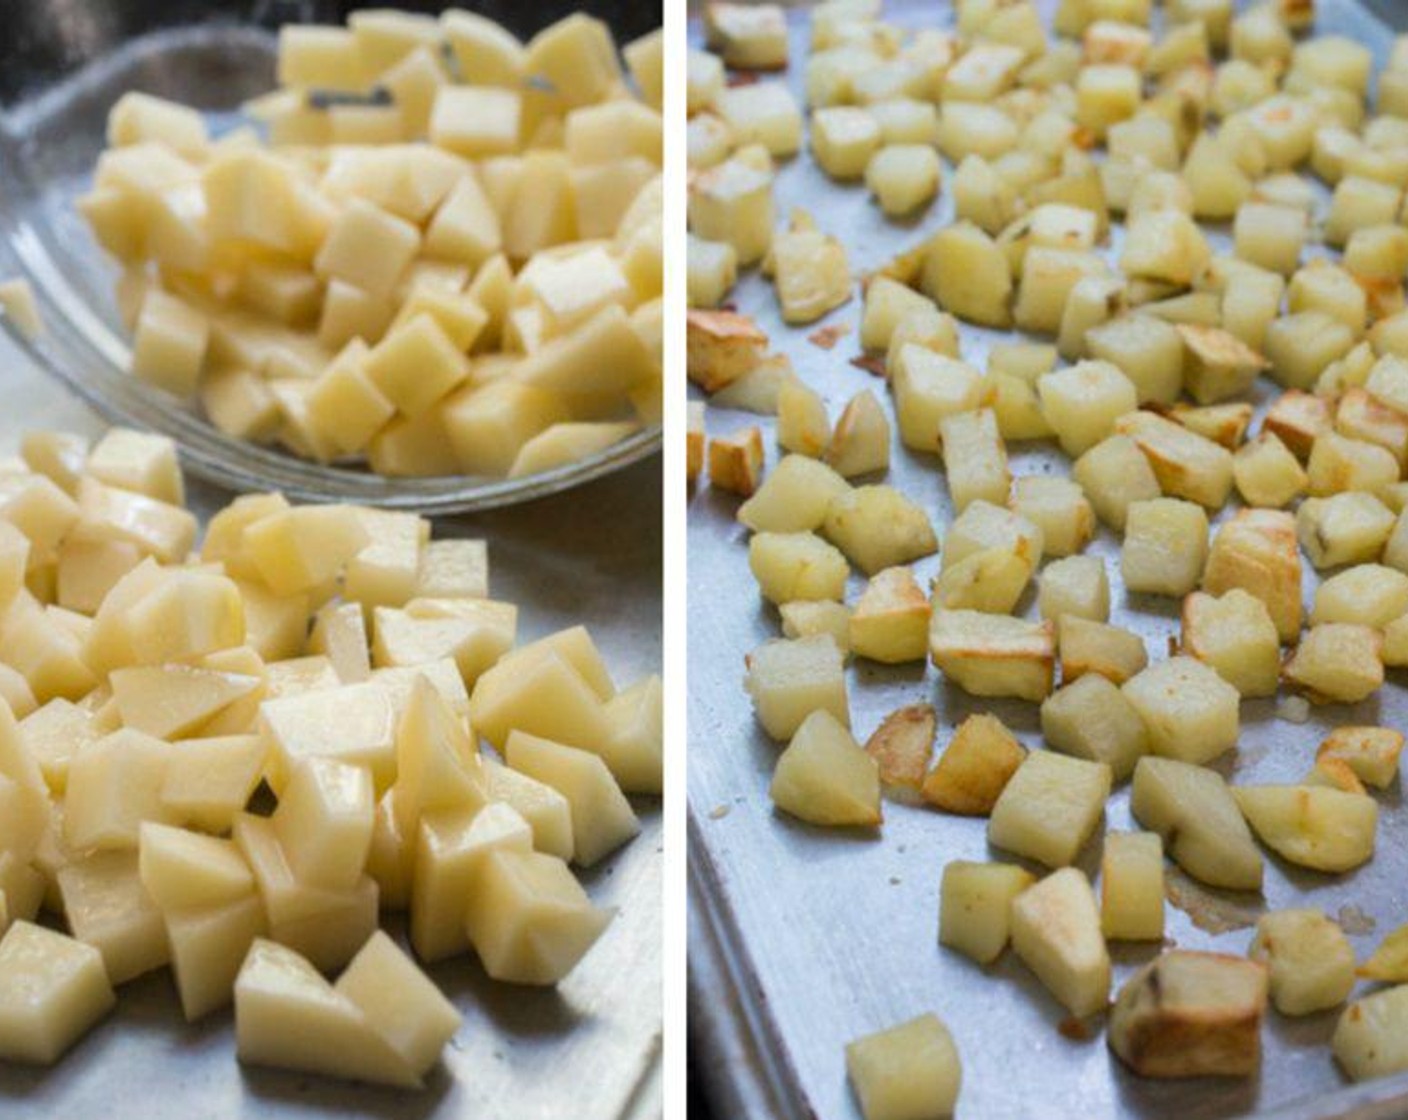 step 2 Toss the Russet Potatoes (2) in Olive Oil (1 Tbsp) and lay them out on a baking tray, then bake for 30 minutes.